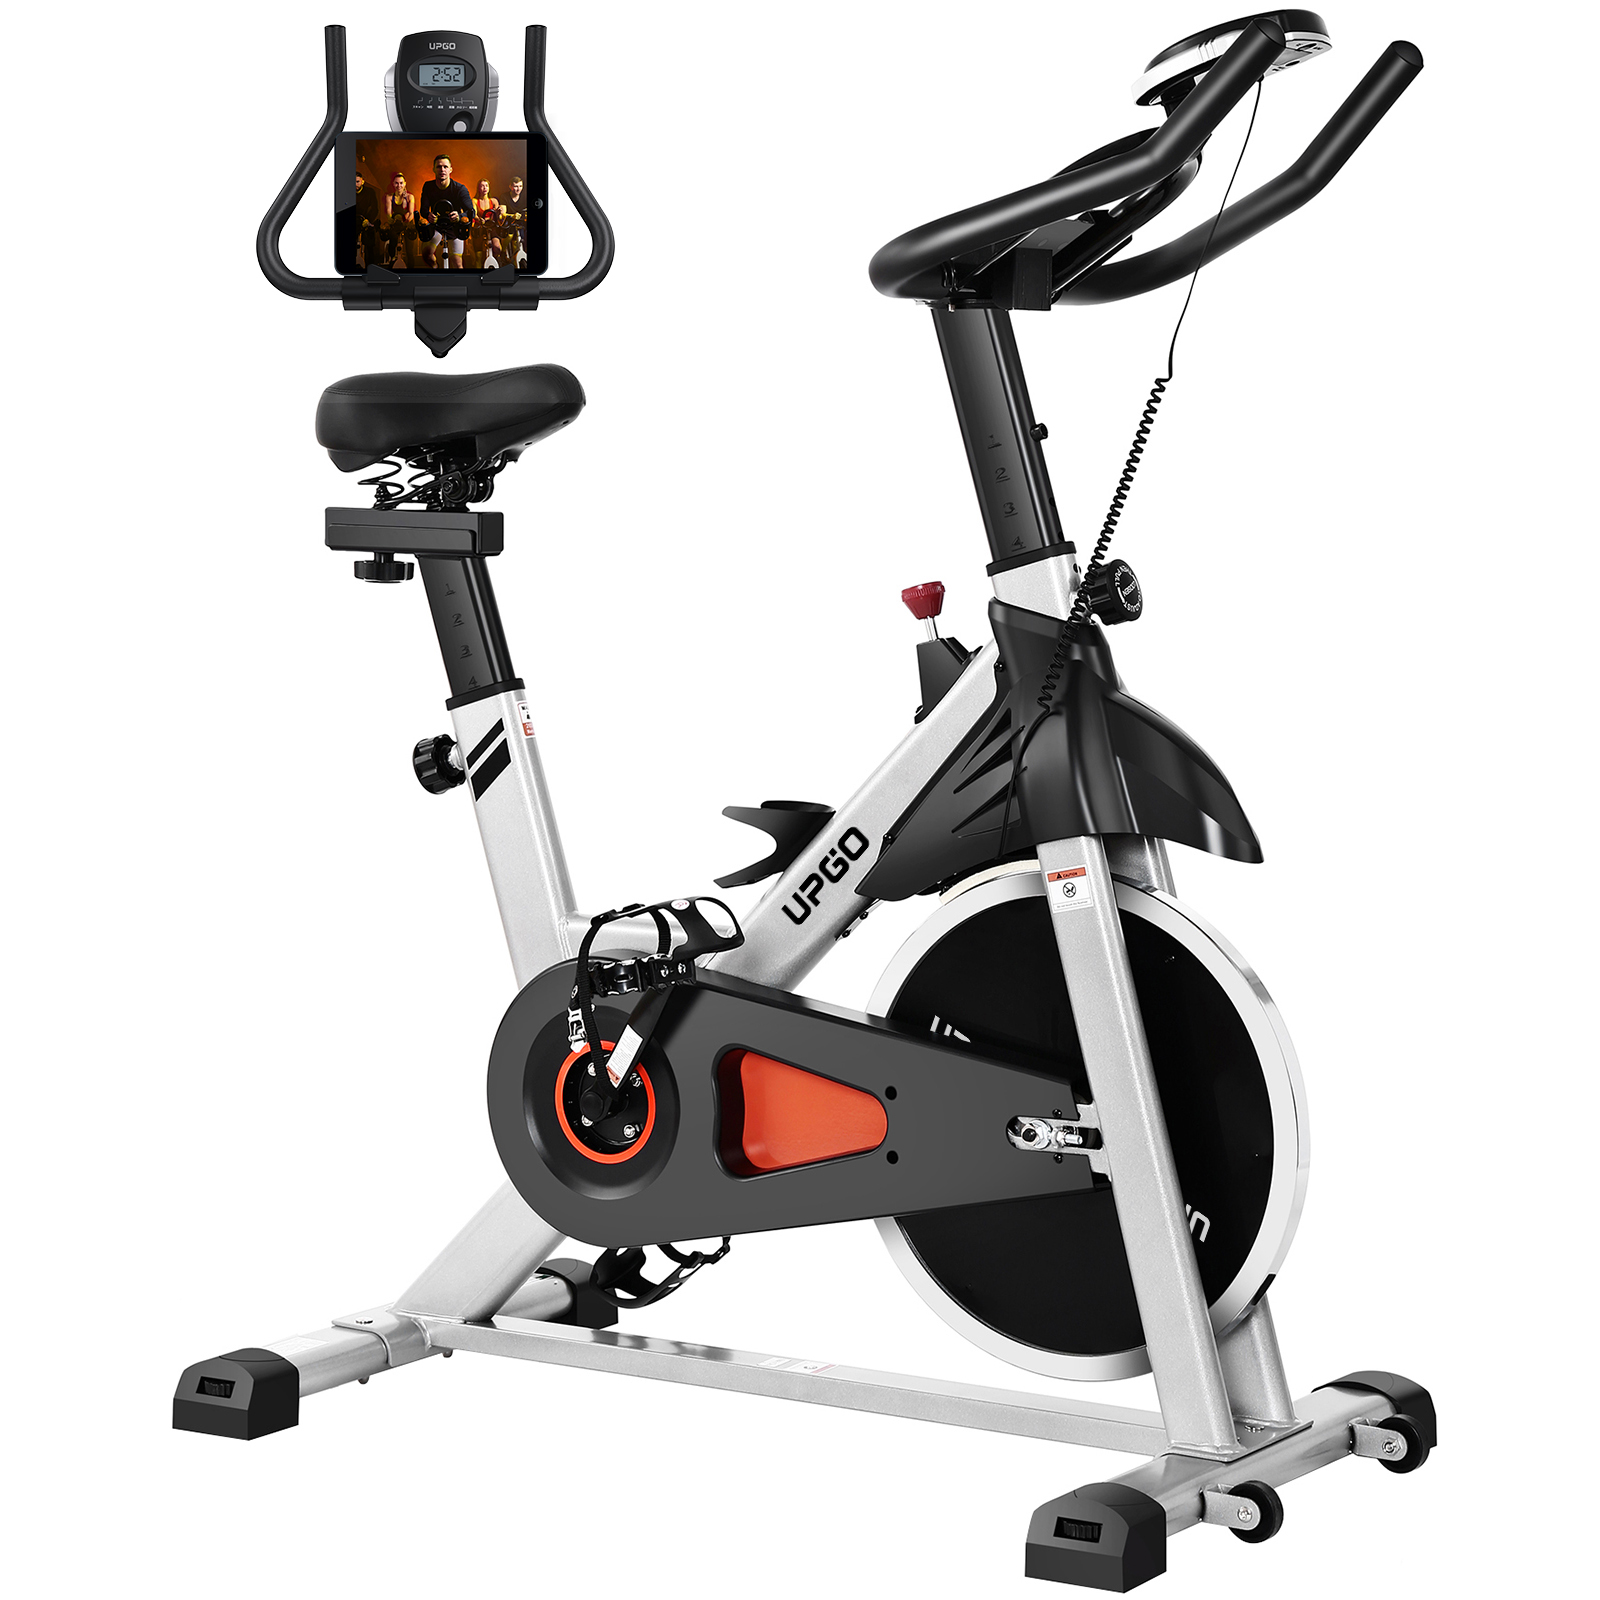 UPGO Indoor Cycling Bike Stationary Bike with 270lb Max Weight Exercise Bicycle with Ipad Mount & Comfortable Seat Cushion for Home Cardio Workout - image 4 of 11